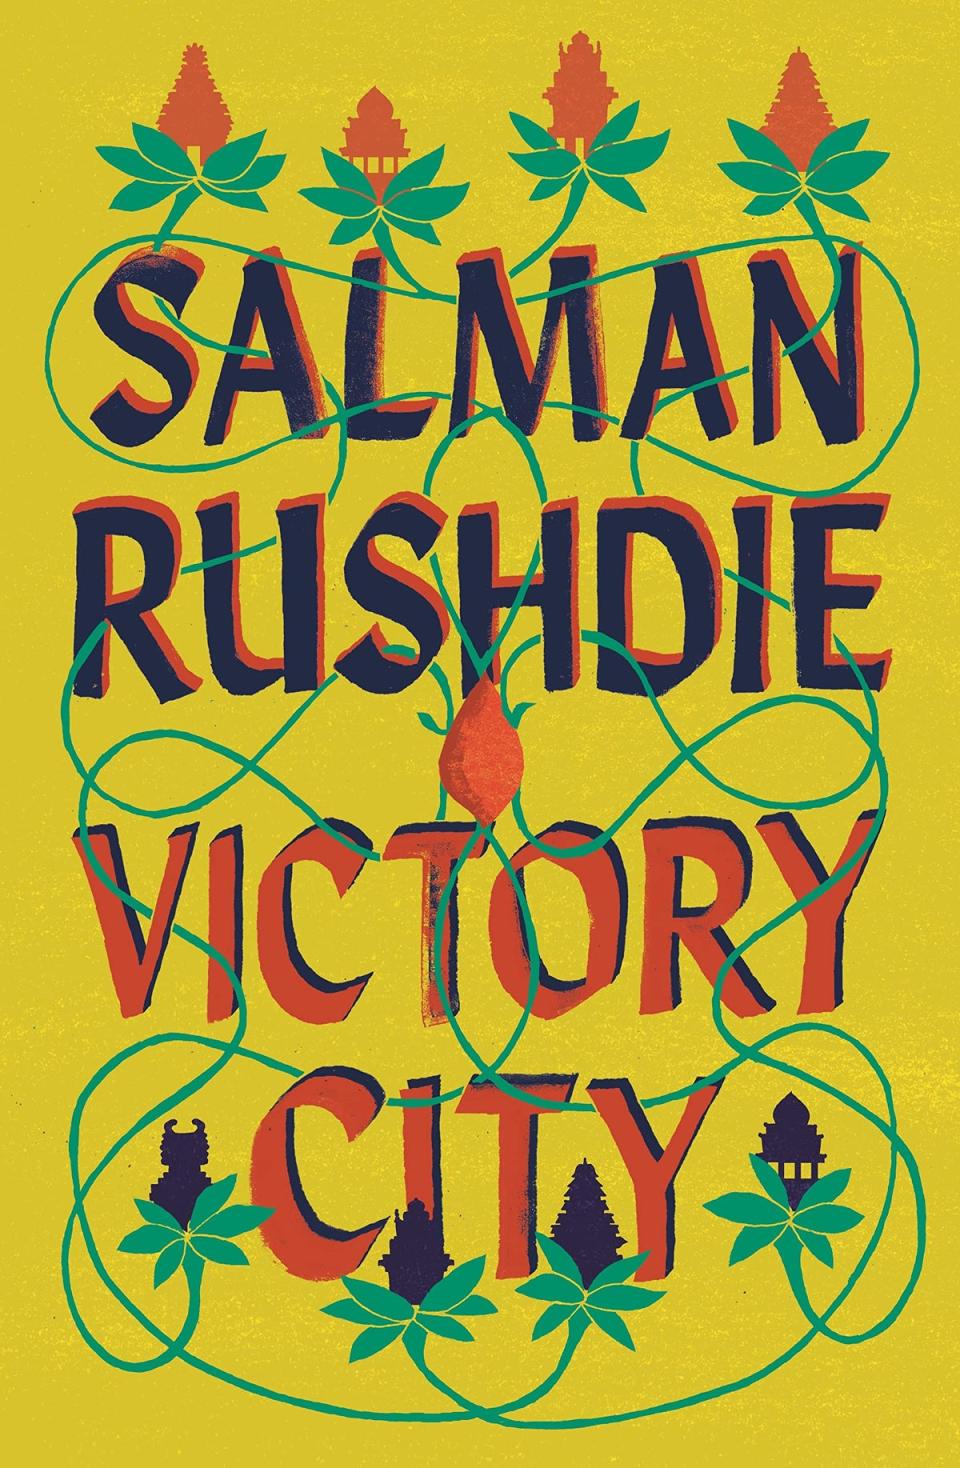 The cover of Victory City by Salman Rushdie (Salman Rushdie)